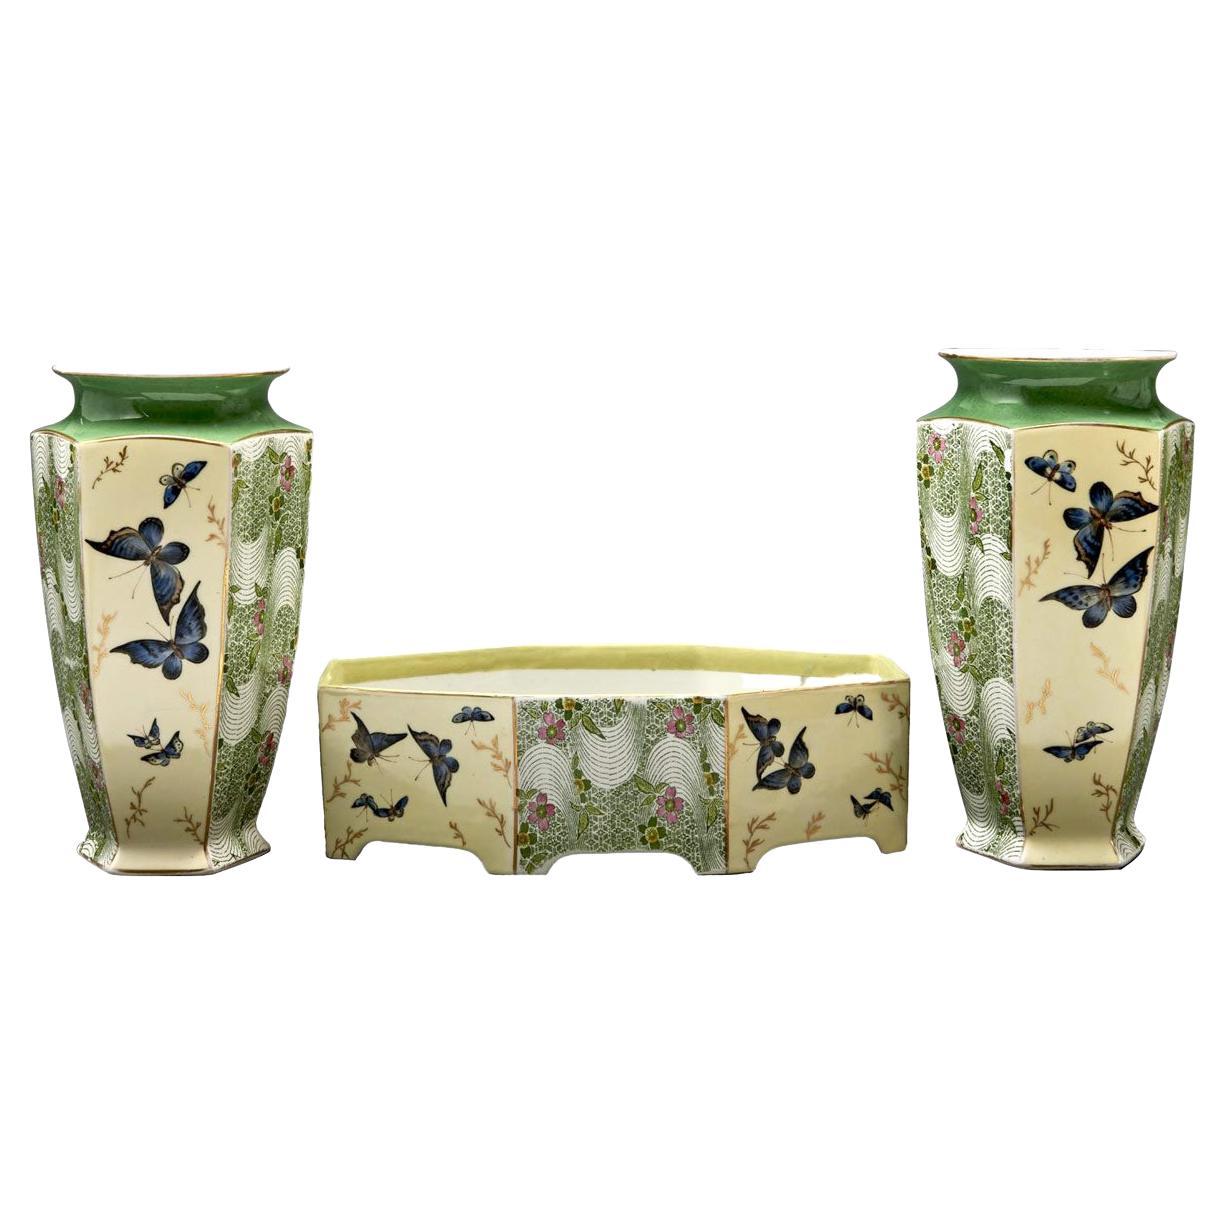 Very rare set of aesthetic movement Limoges porcelain composed of 2 vases and a planter.
The whole set is decorated with beige and green tones with lovely blue butterflies, in the perfect style of Japonism pieces. Vases and planter are with canted